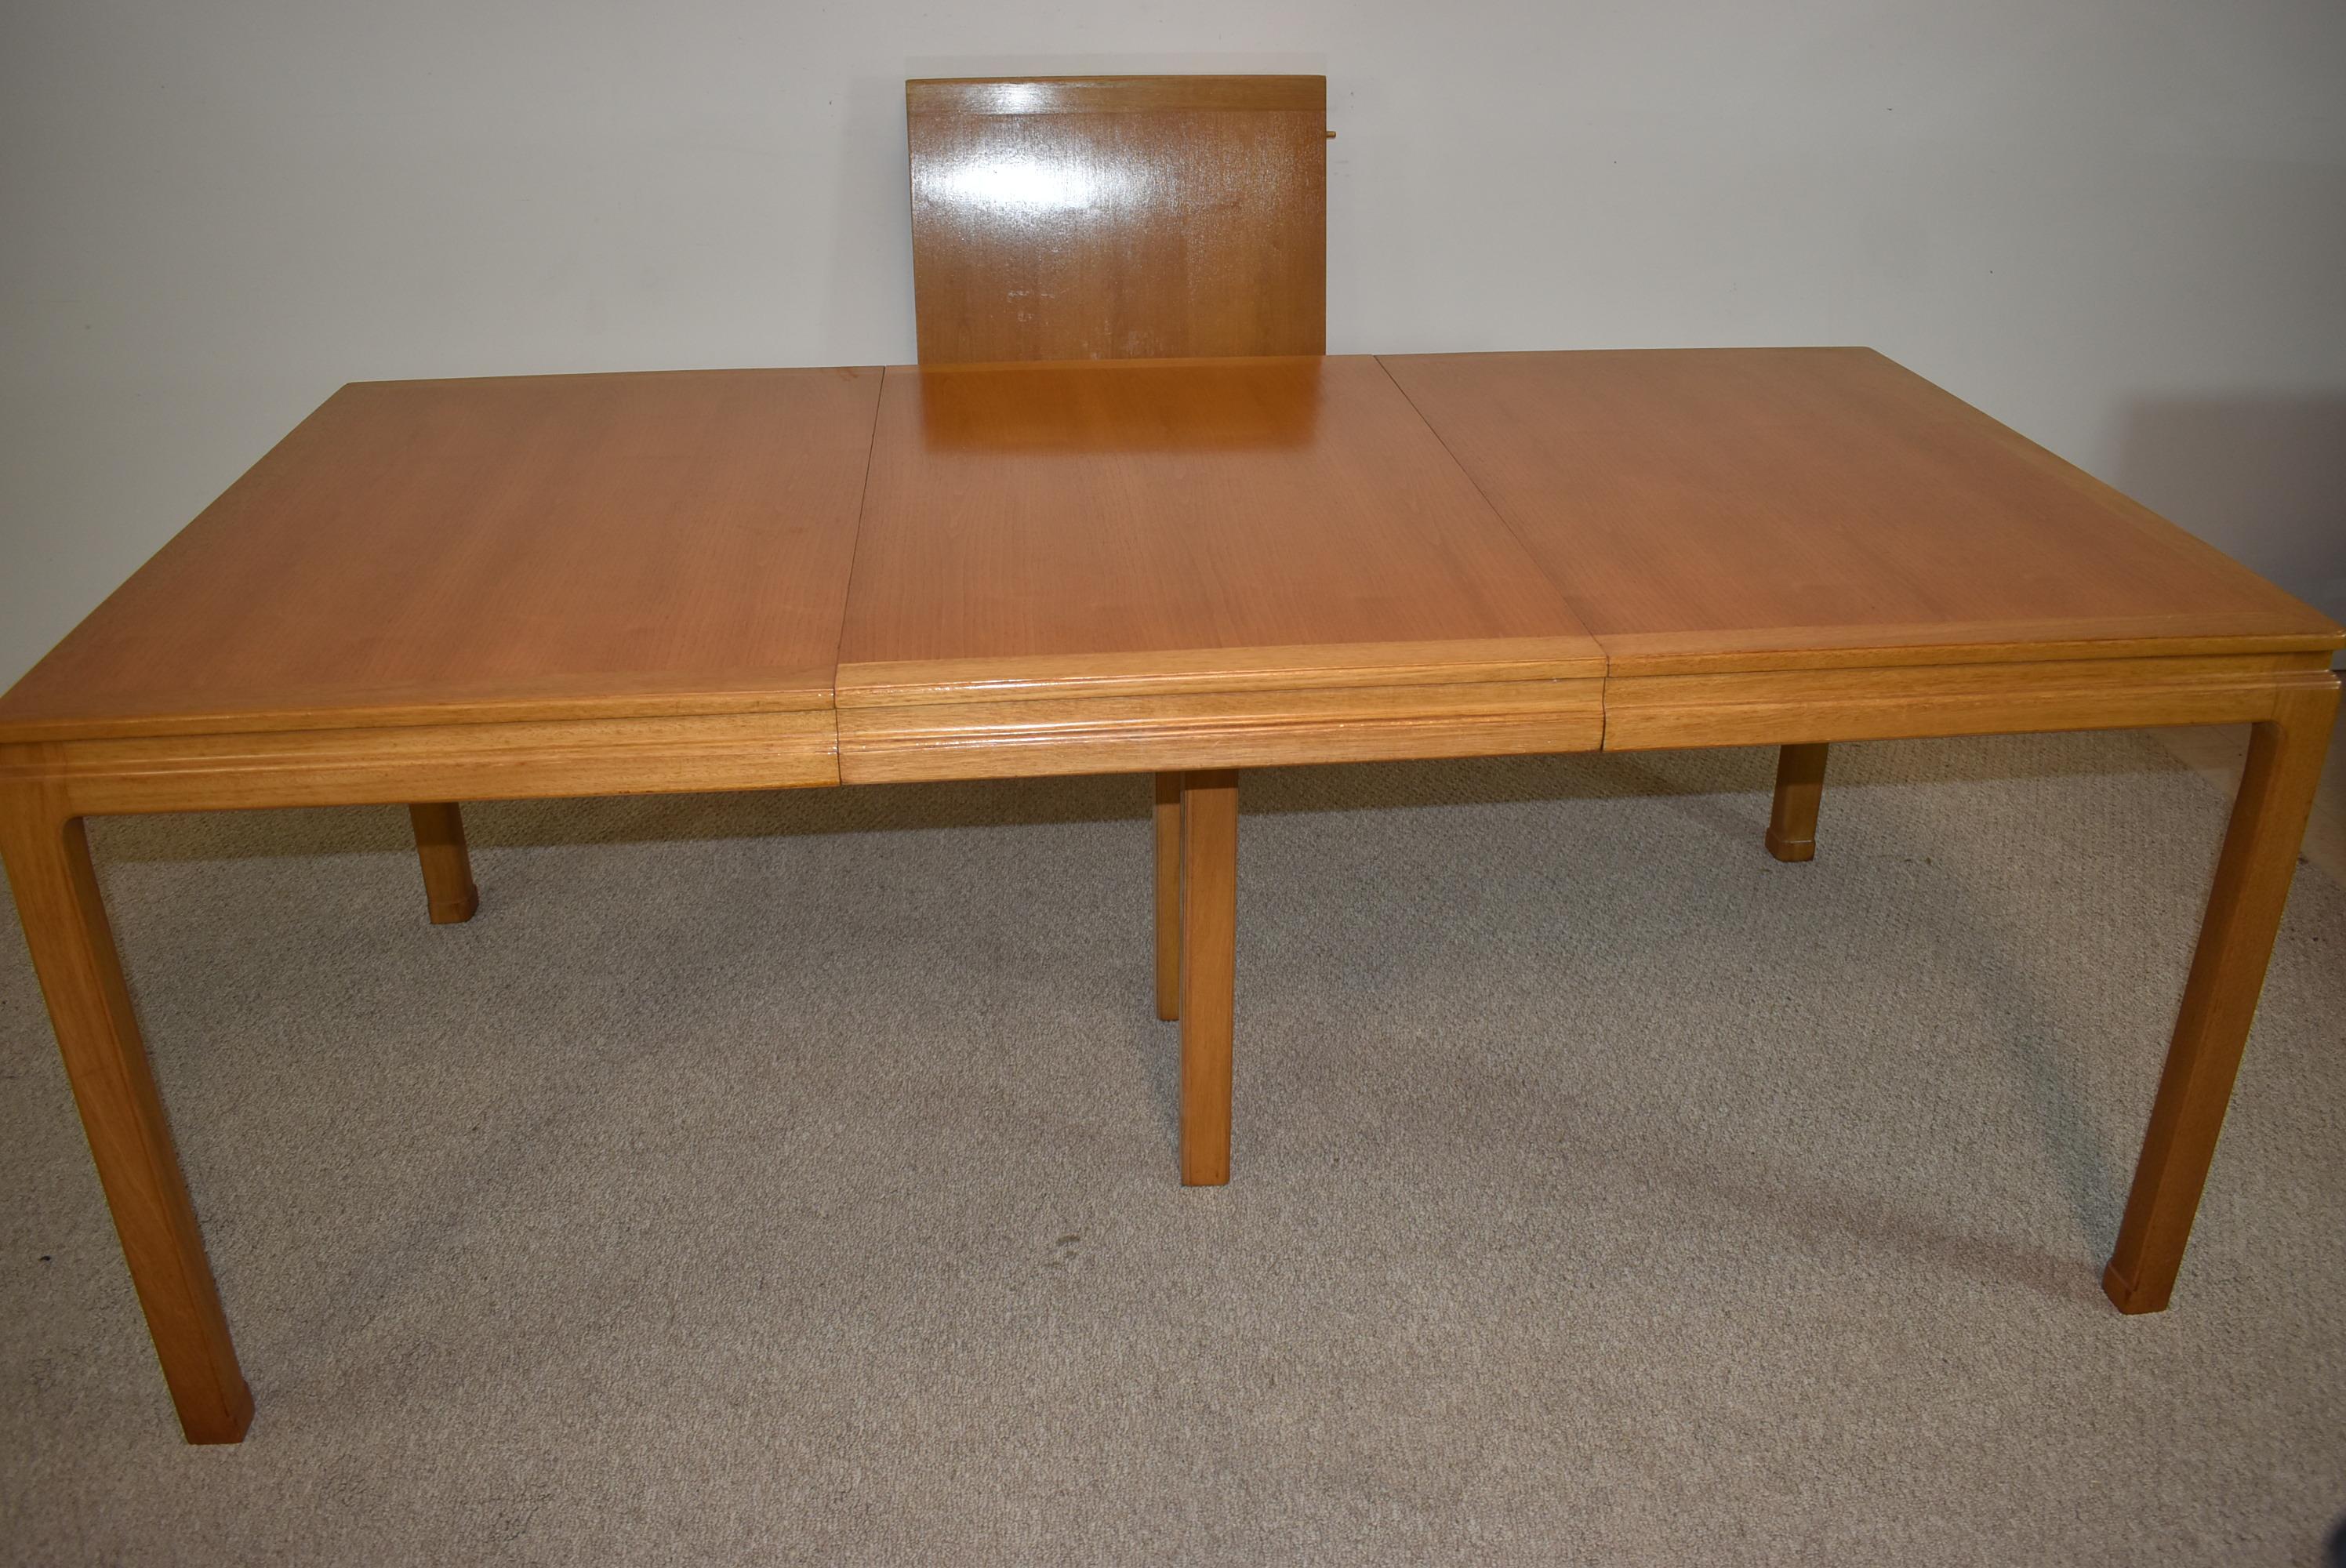 Mahogany Dining Table with Two Leaves by Edward Wormley for Dunbar In Good Condition For Sale In Toledo, OH